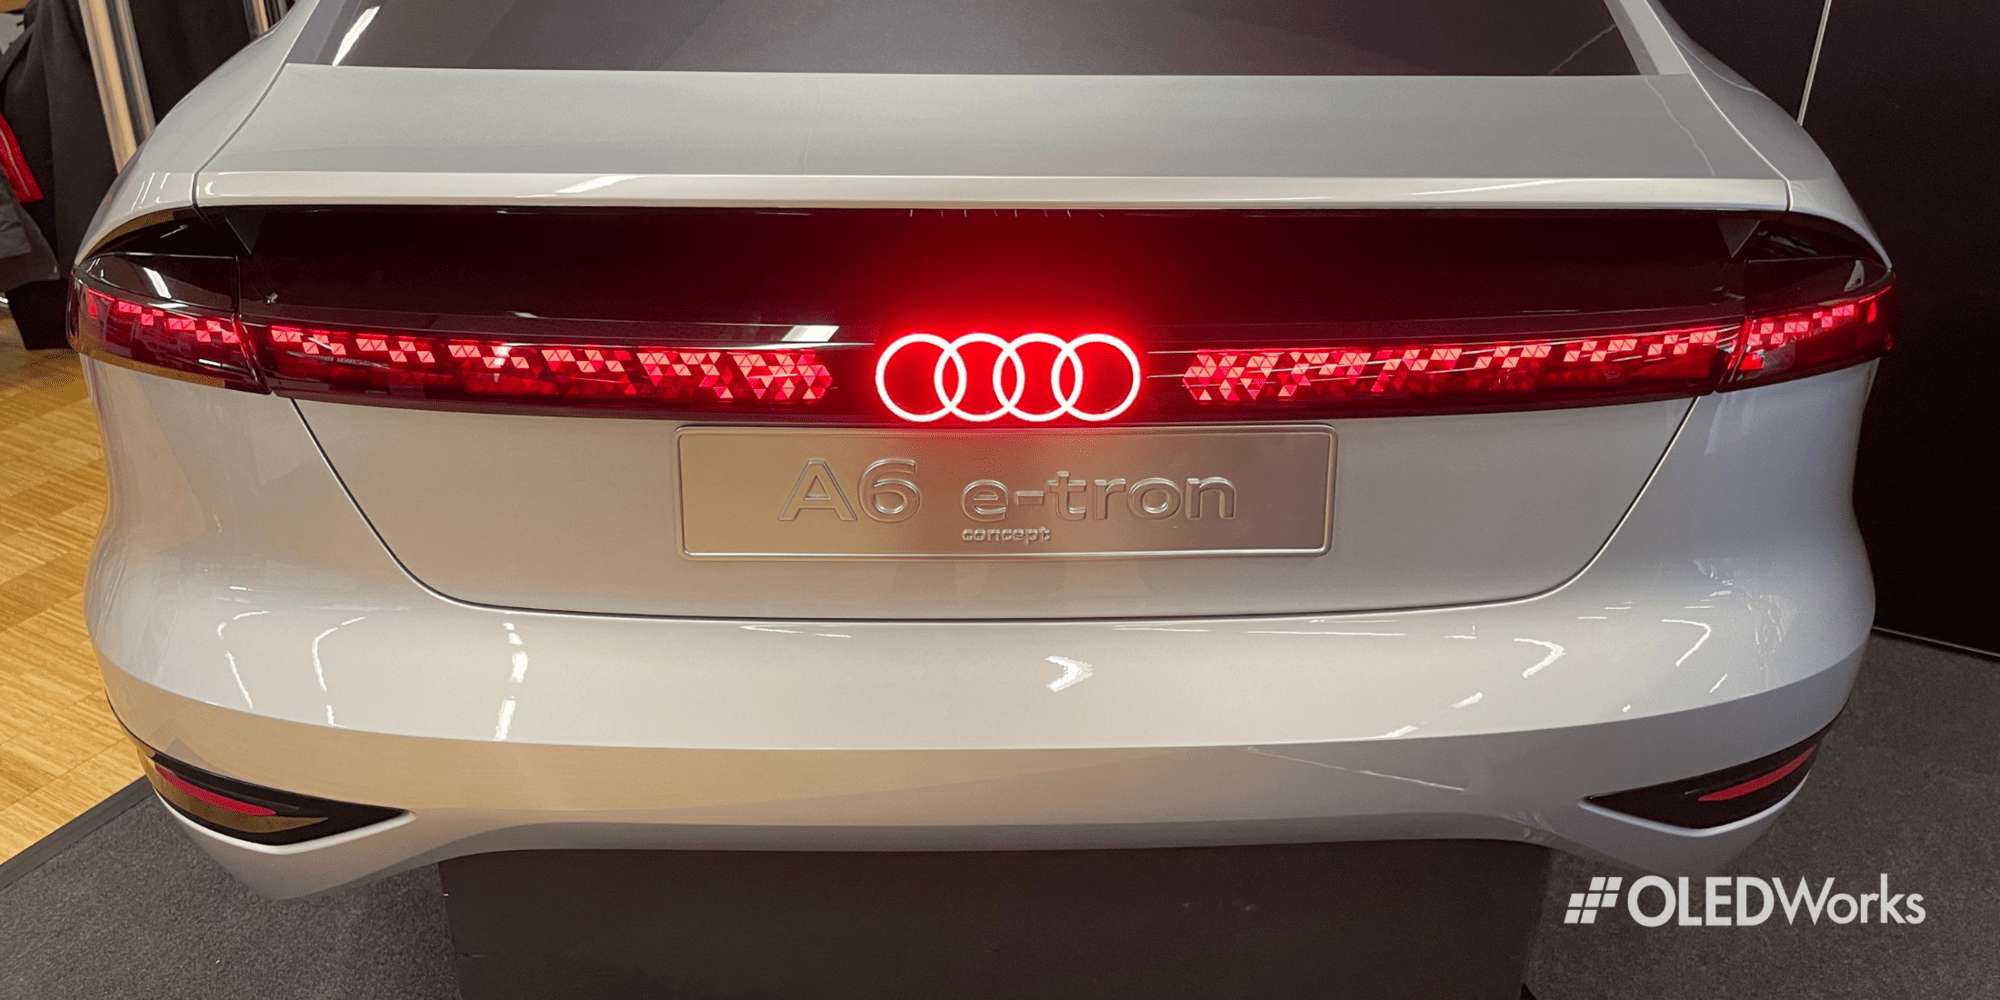 OLED lighting in Audi S21 A6 e-tron Concept